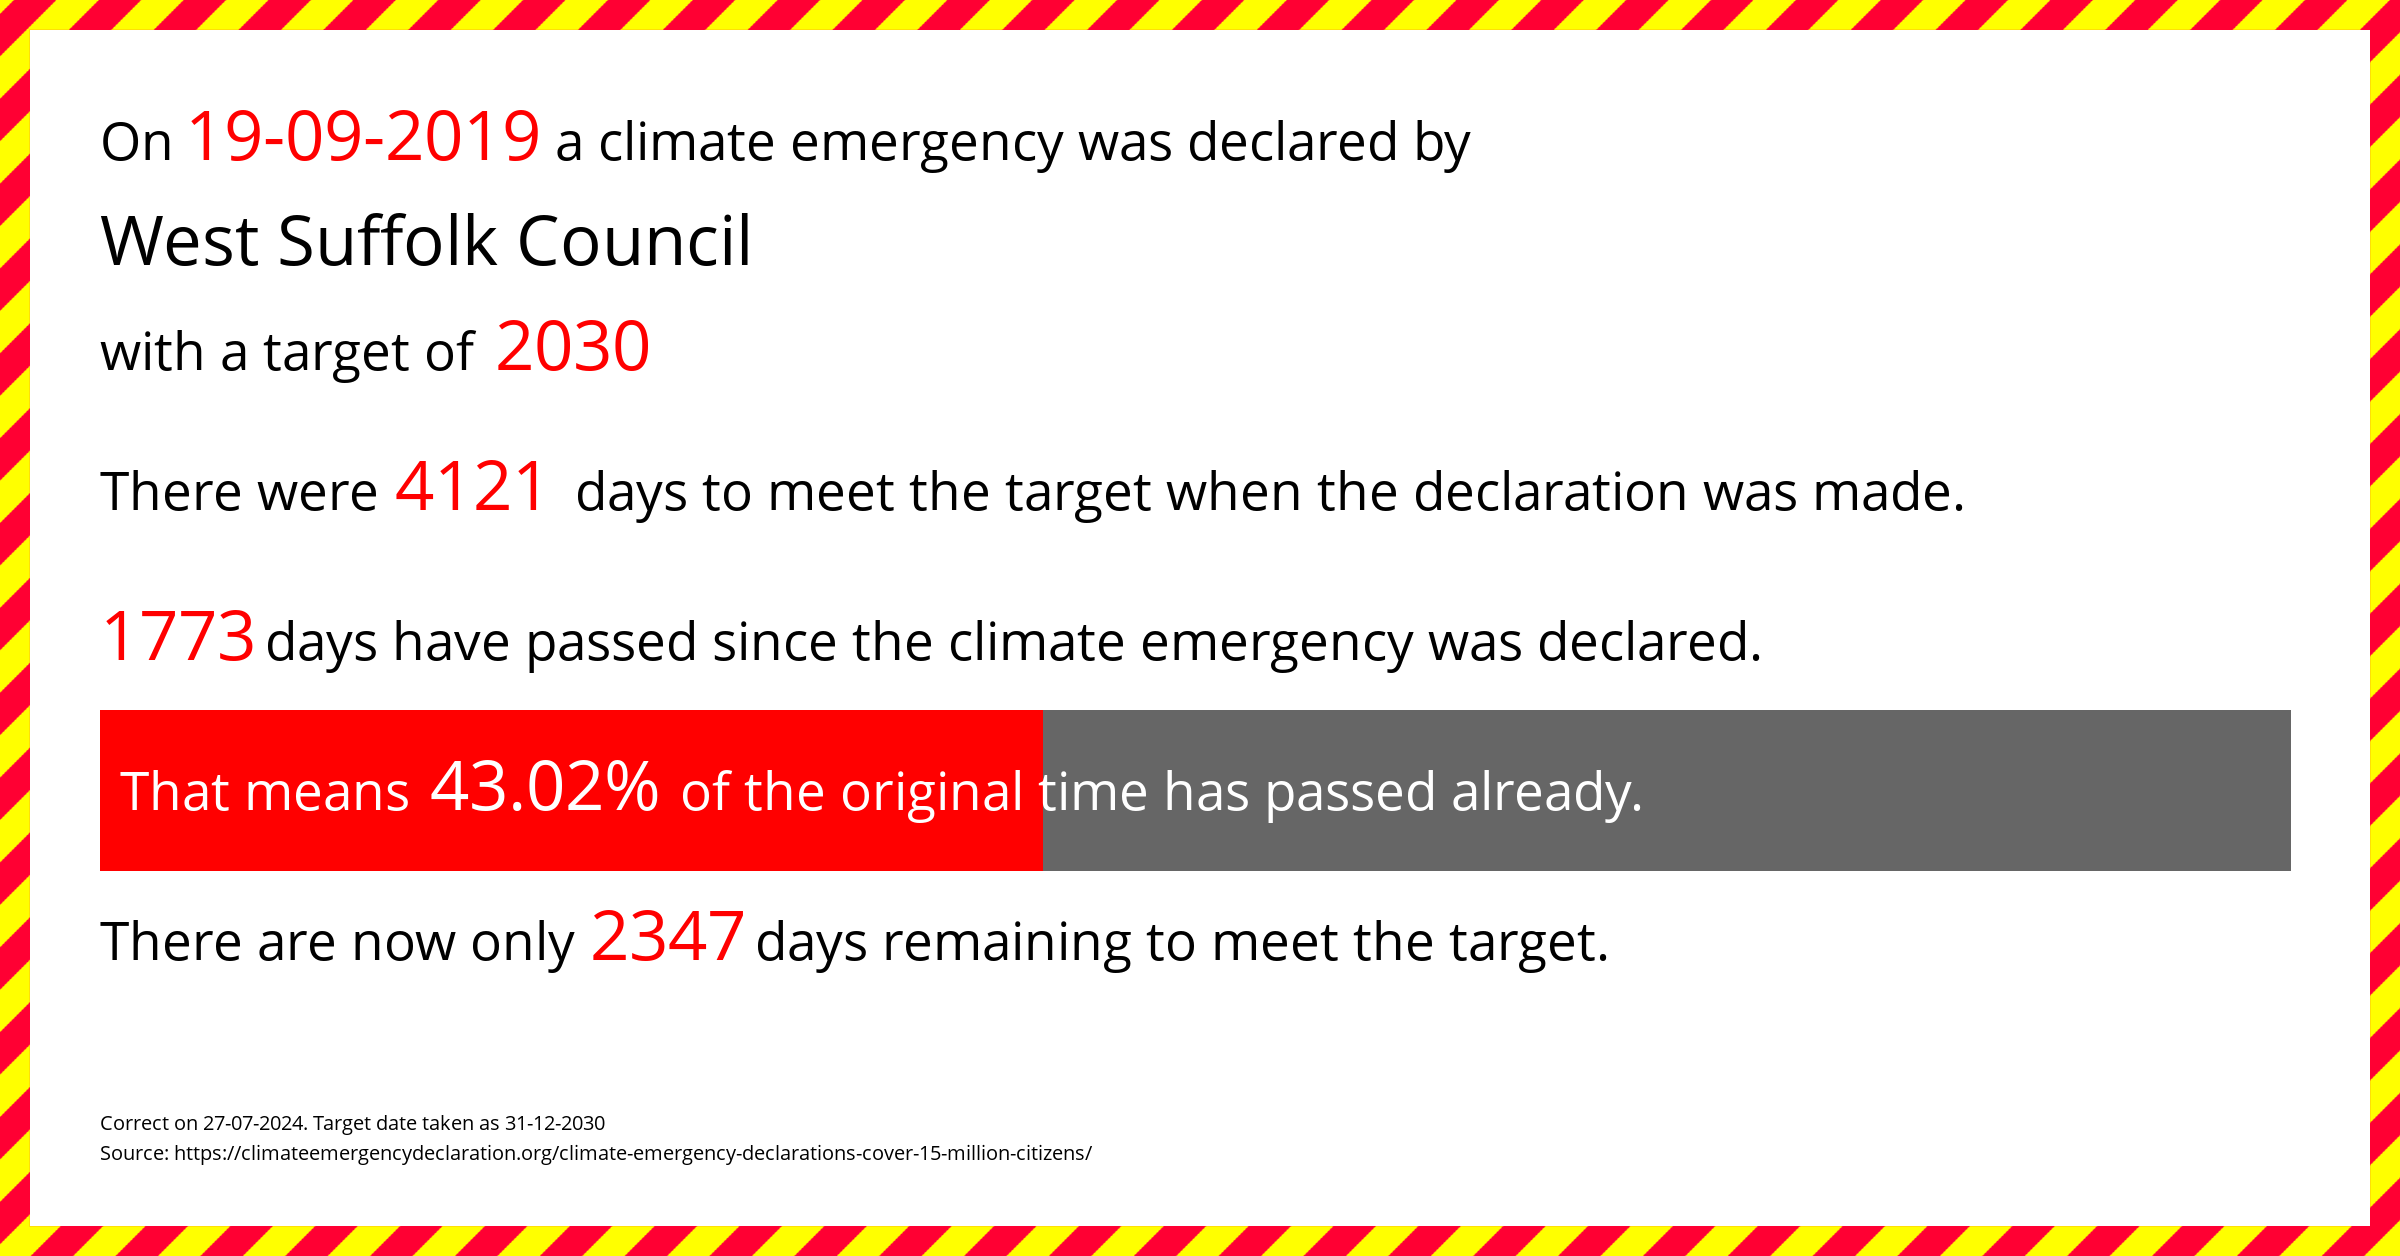 West Suffolk Council  declared a Climate emergency on Thursday 19th September 2019, with a target of 2030.